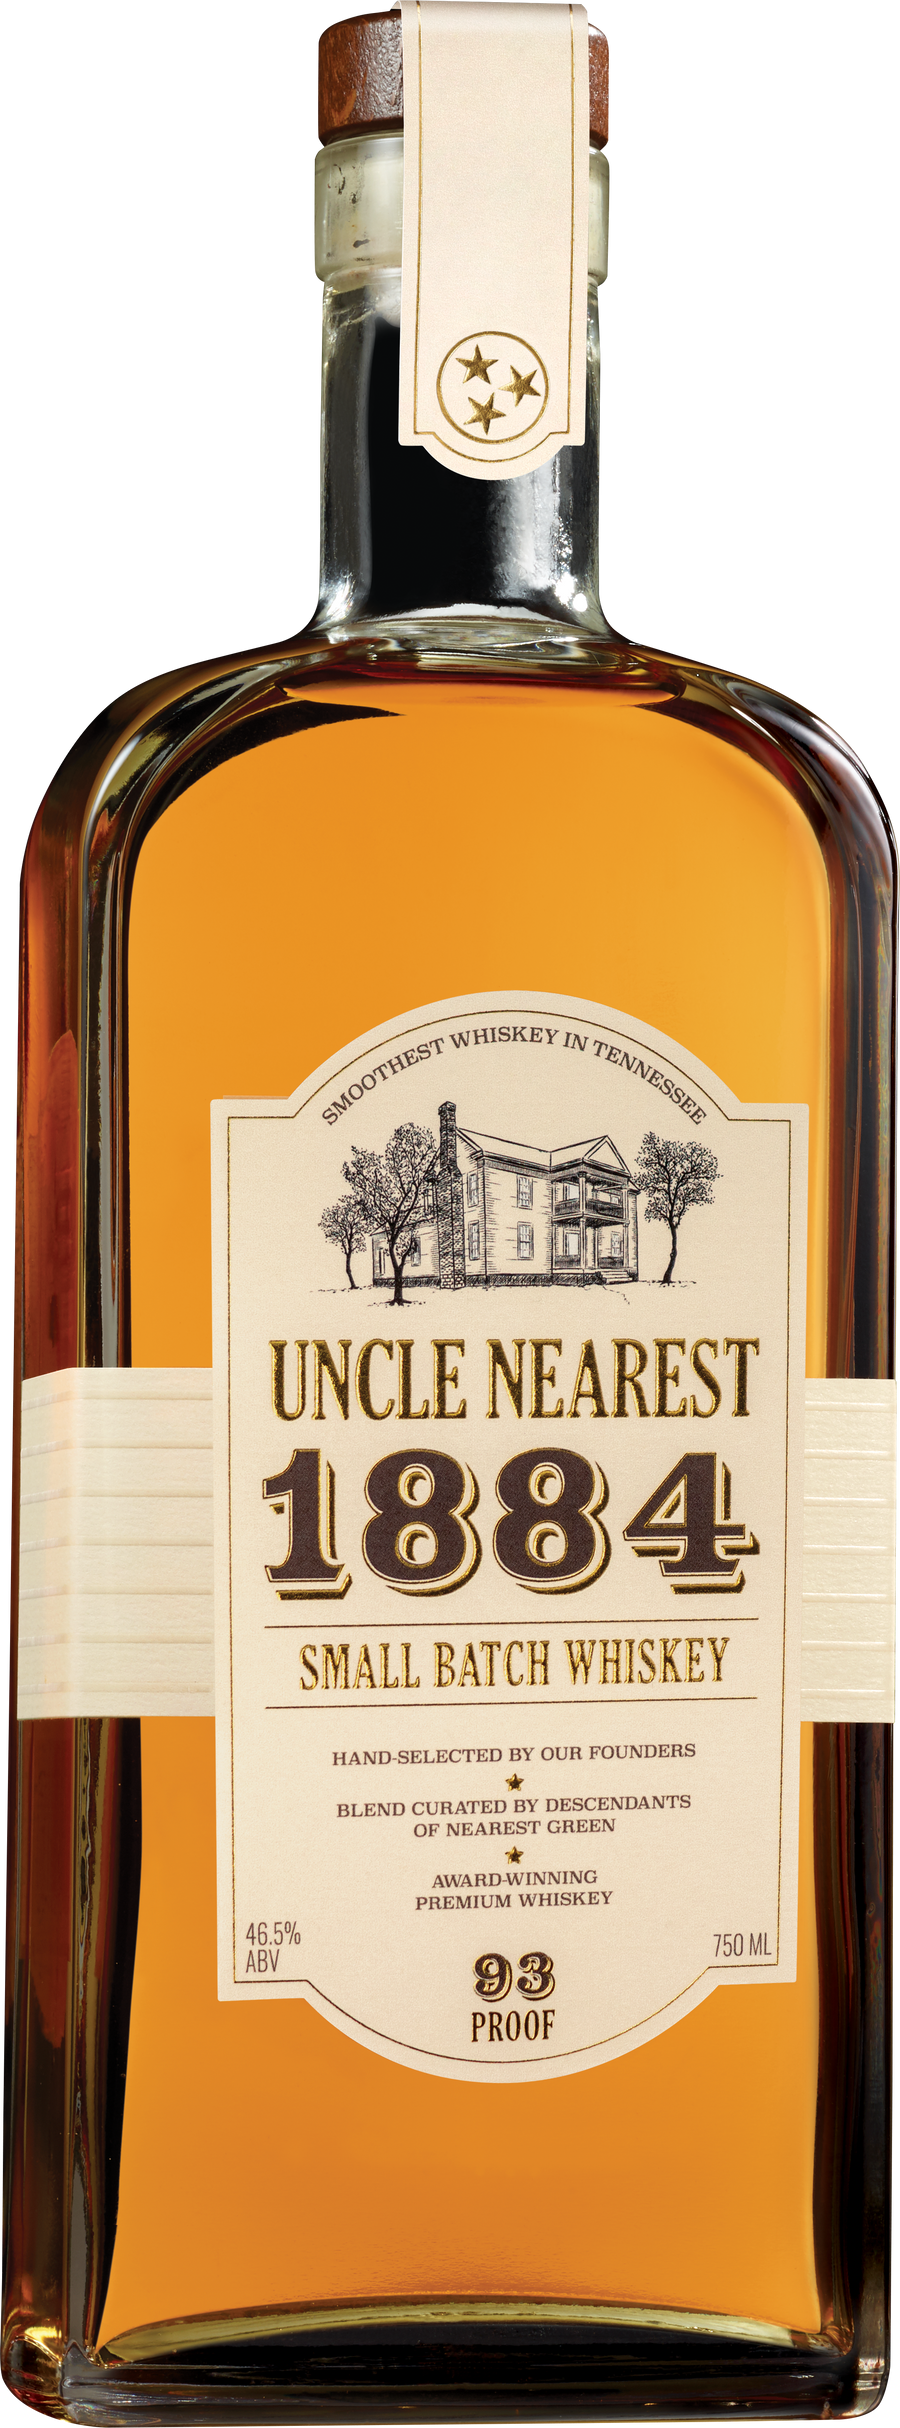 Buy Uncle Nearest 1884 Small Batch Whiskey Online -Craft City